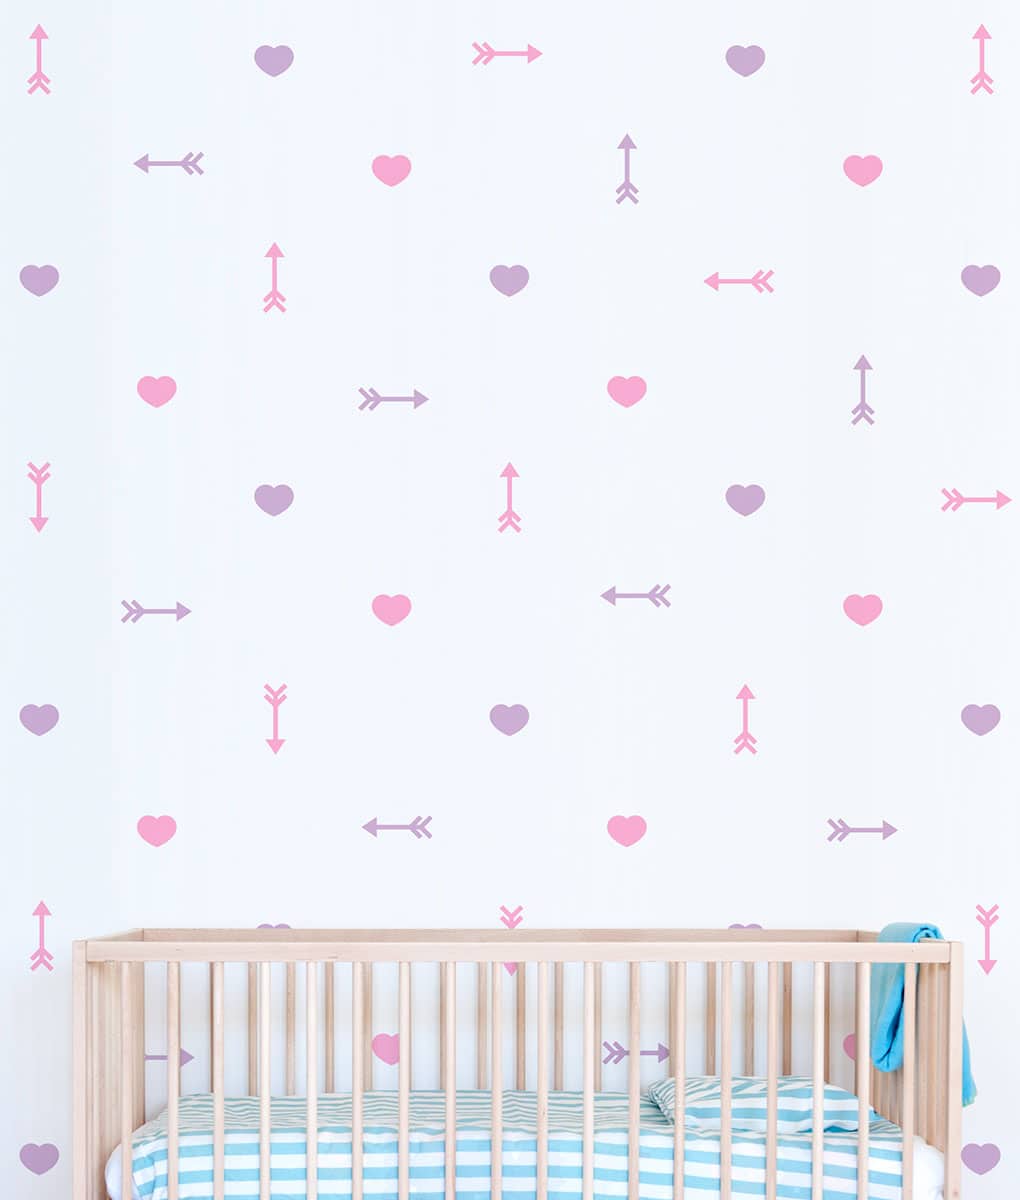 Little Hearts Wall Stickers Removable Home Decoration Wallpaper Decals Girl Room